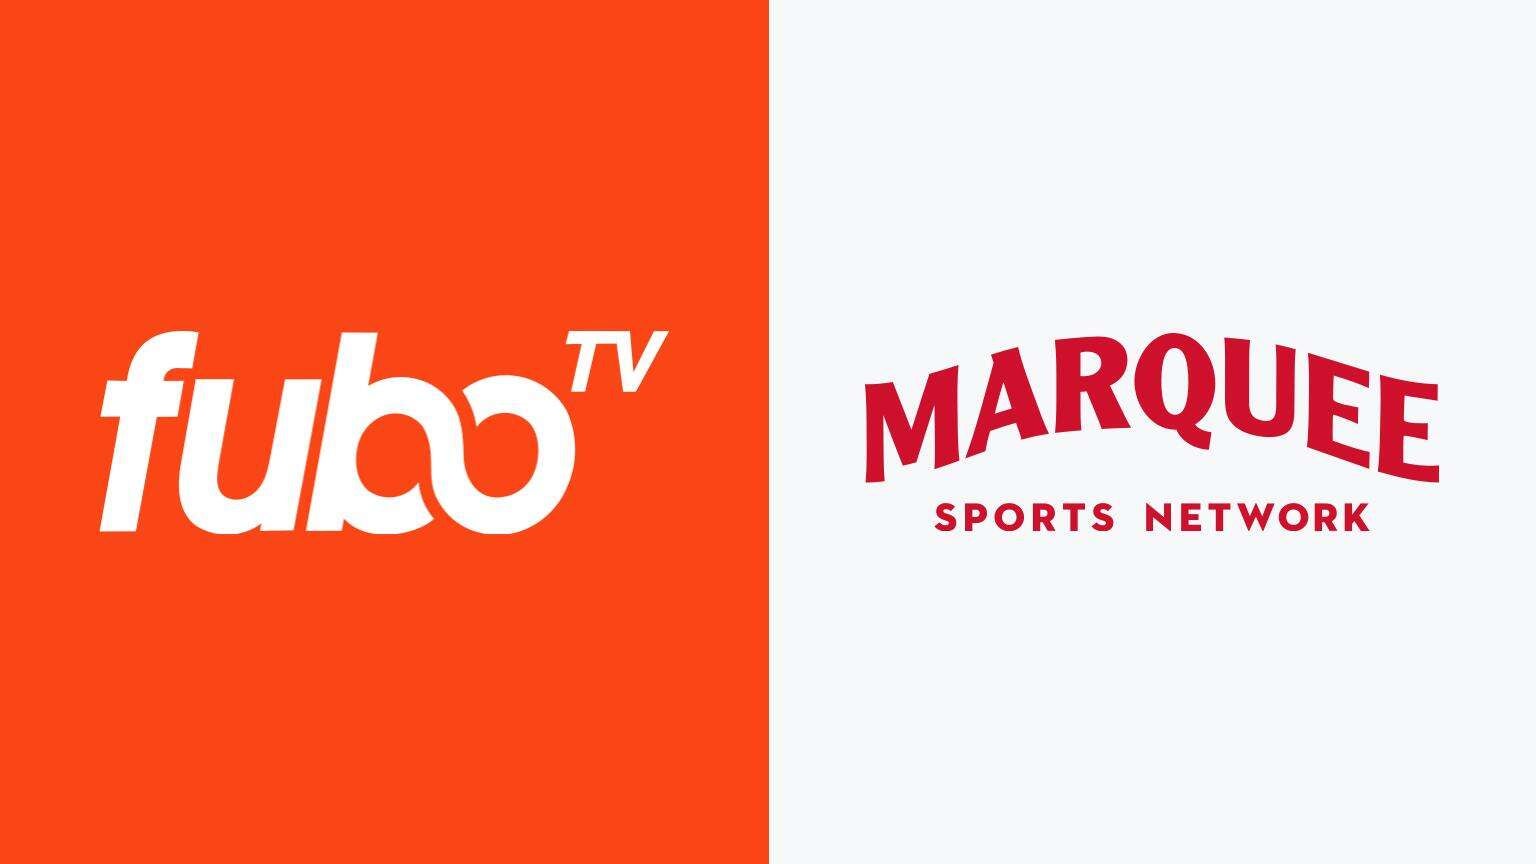 Marquee Sports Network Is Now Available On Fubotv To Stream Live Cubs Games The Streamable